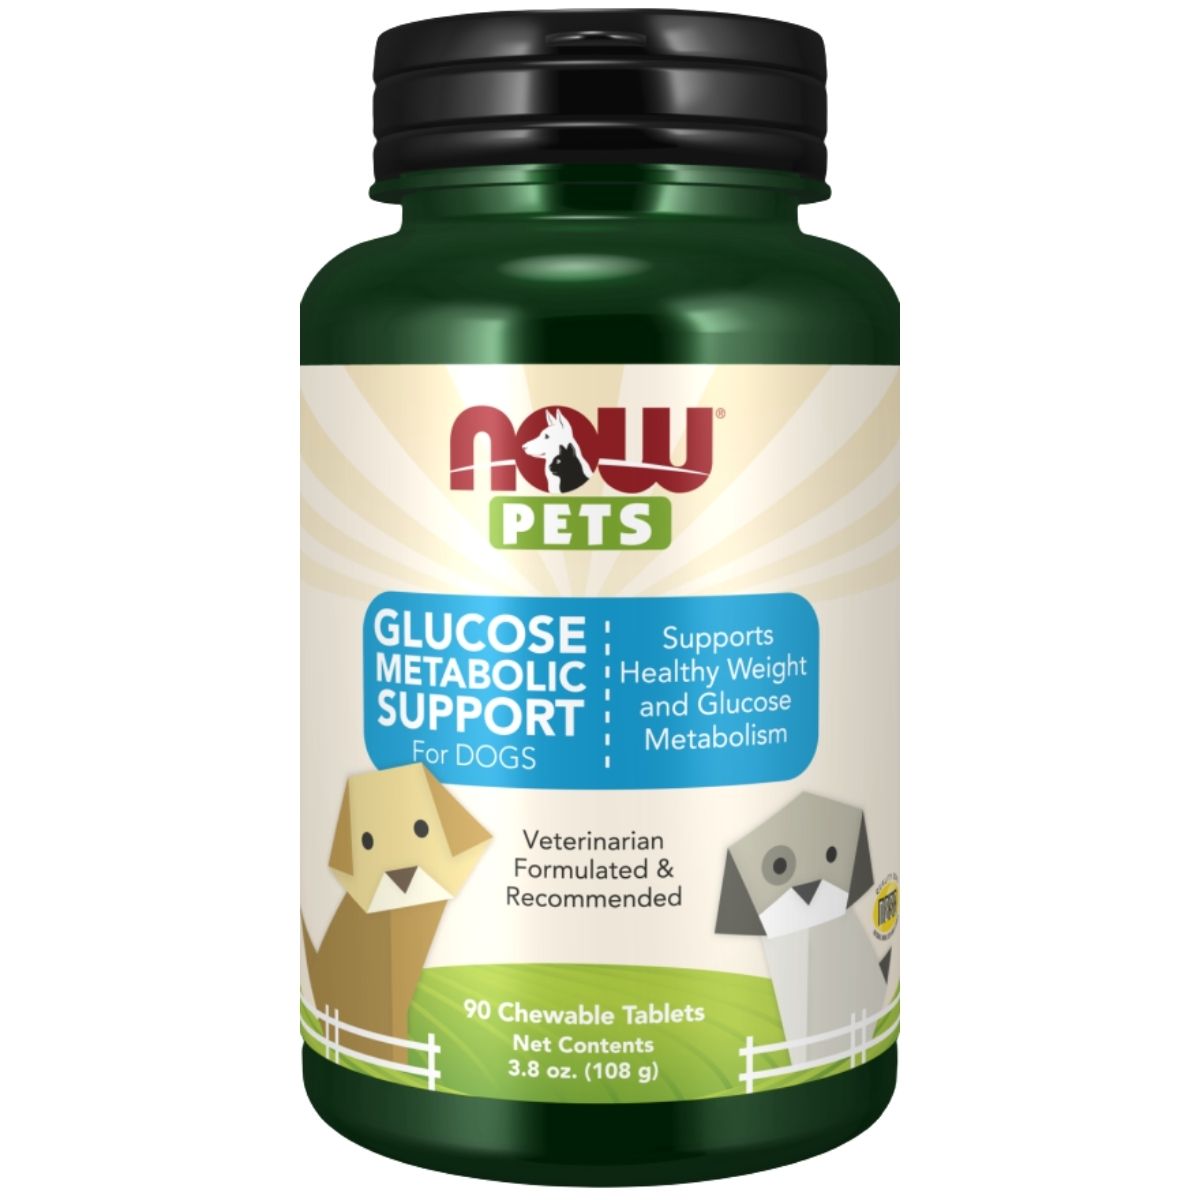 Glucose Metabolic Support for Dogs